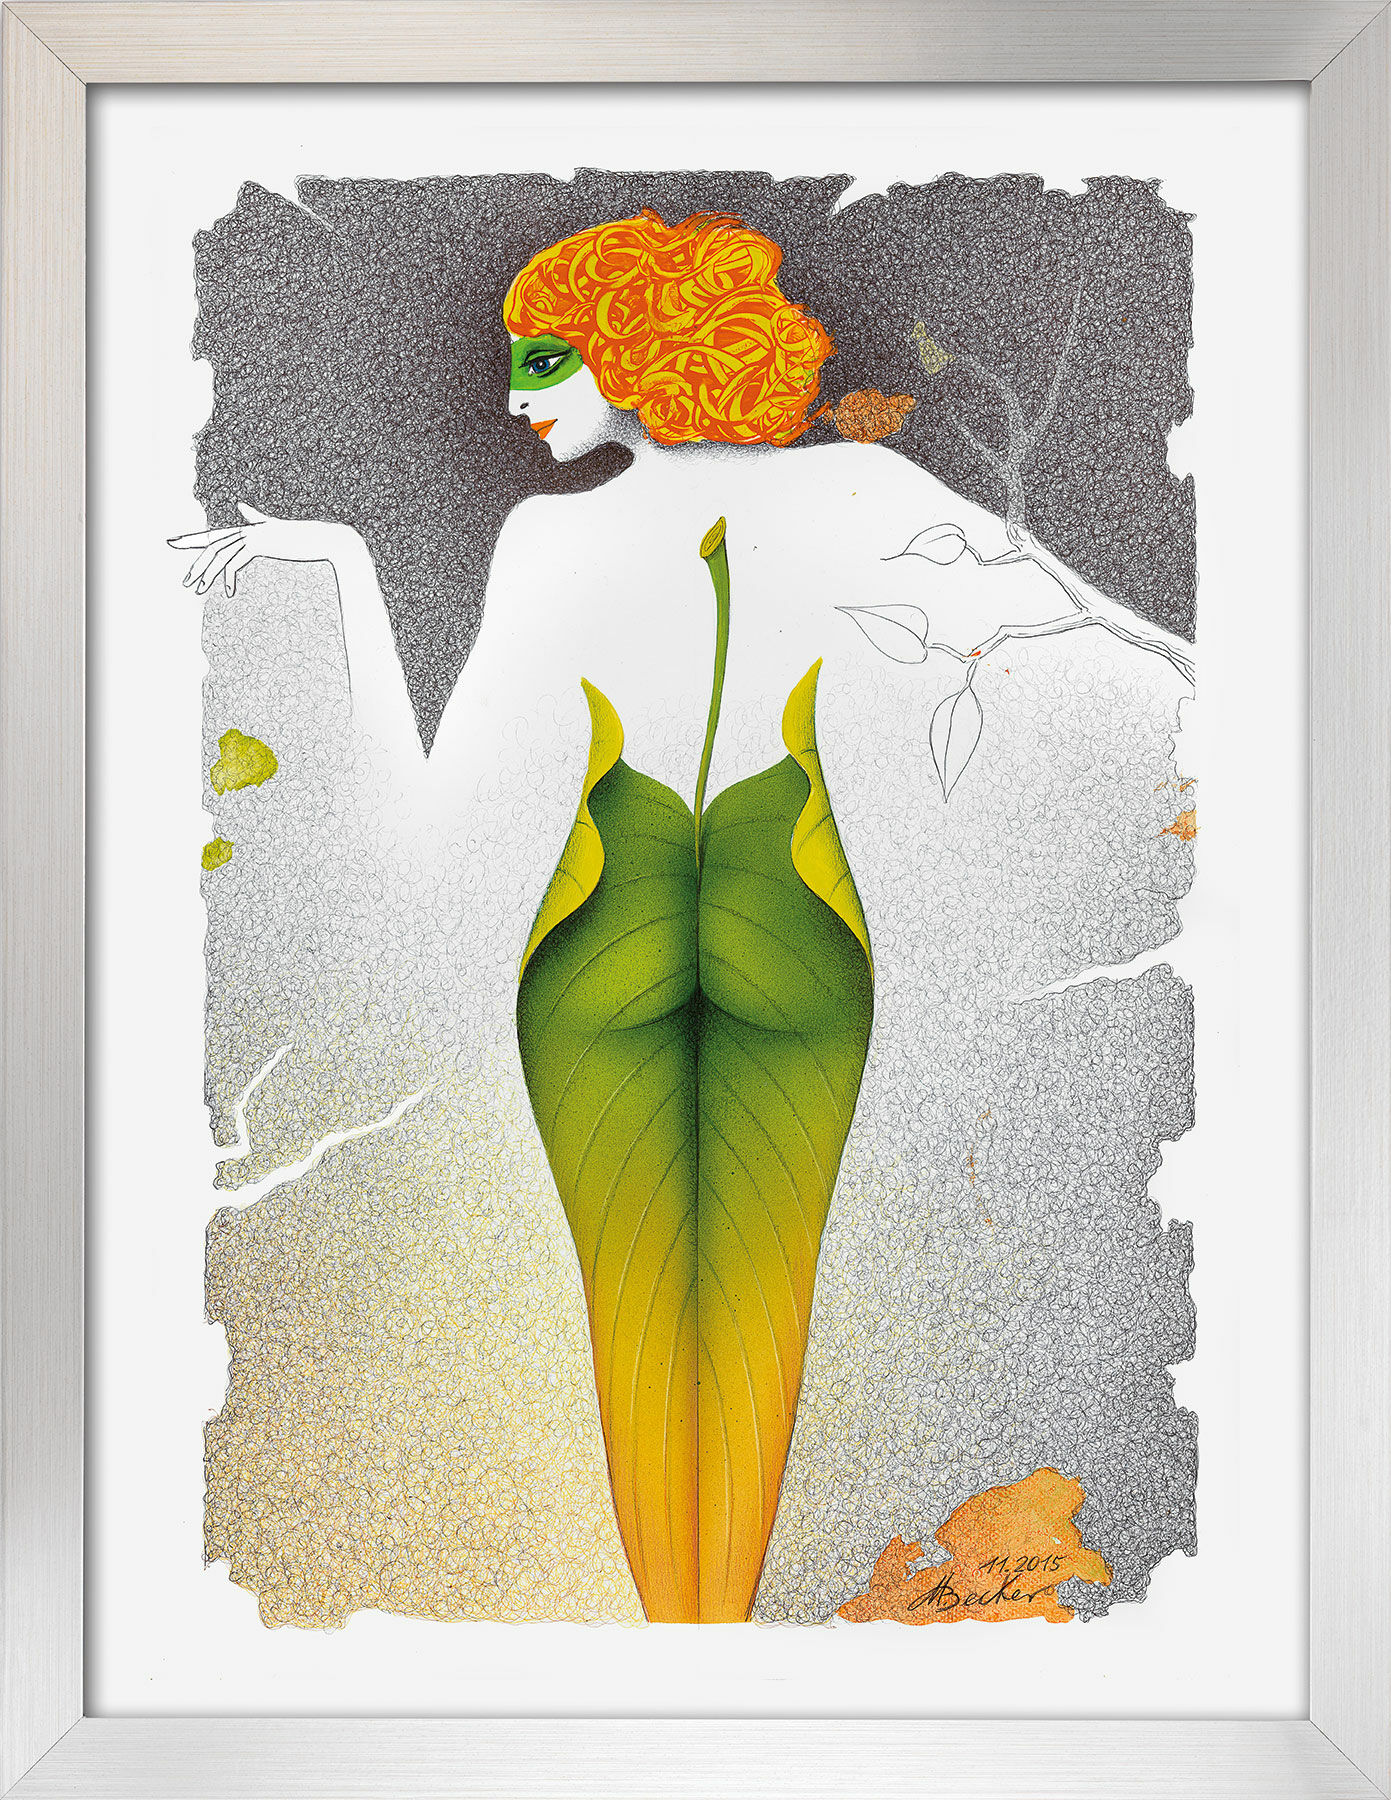 Picture "Leaf Figure" (2015), framed by Michael Becker